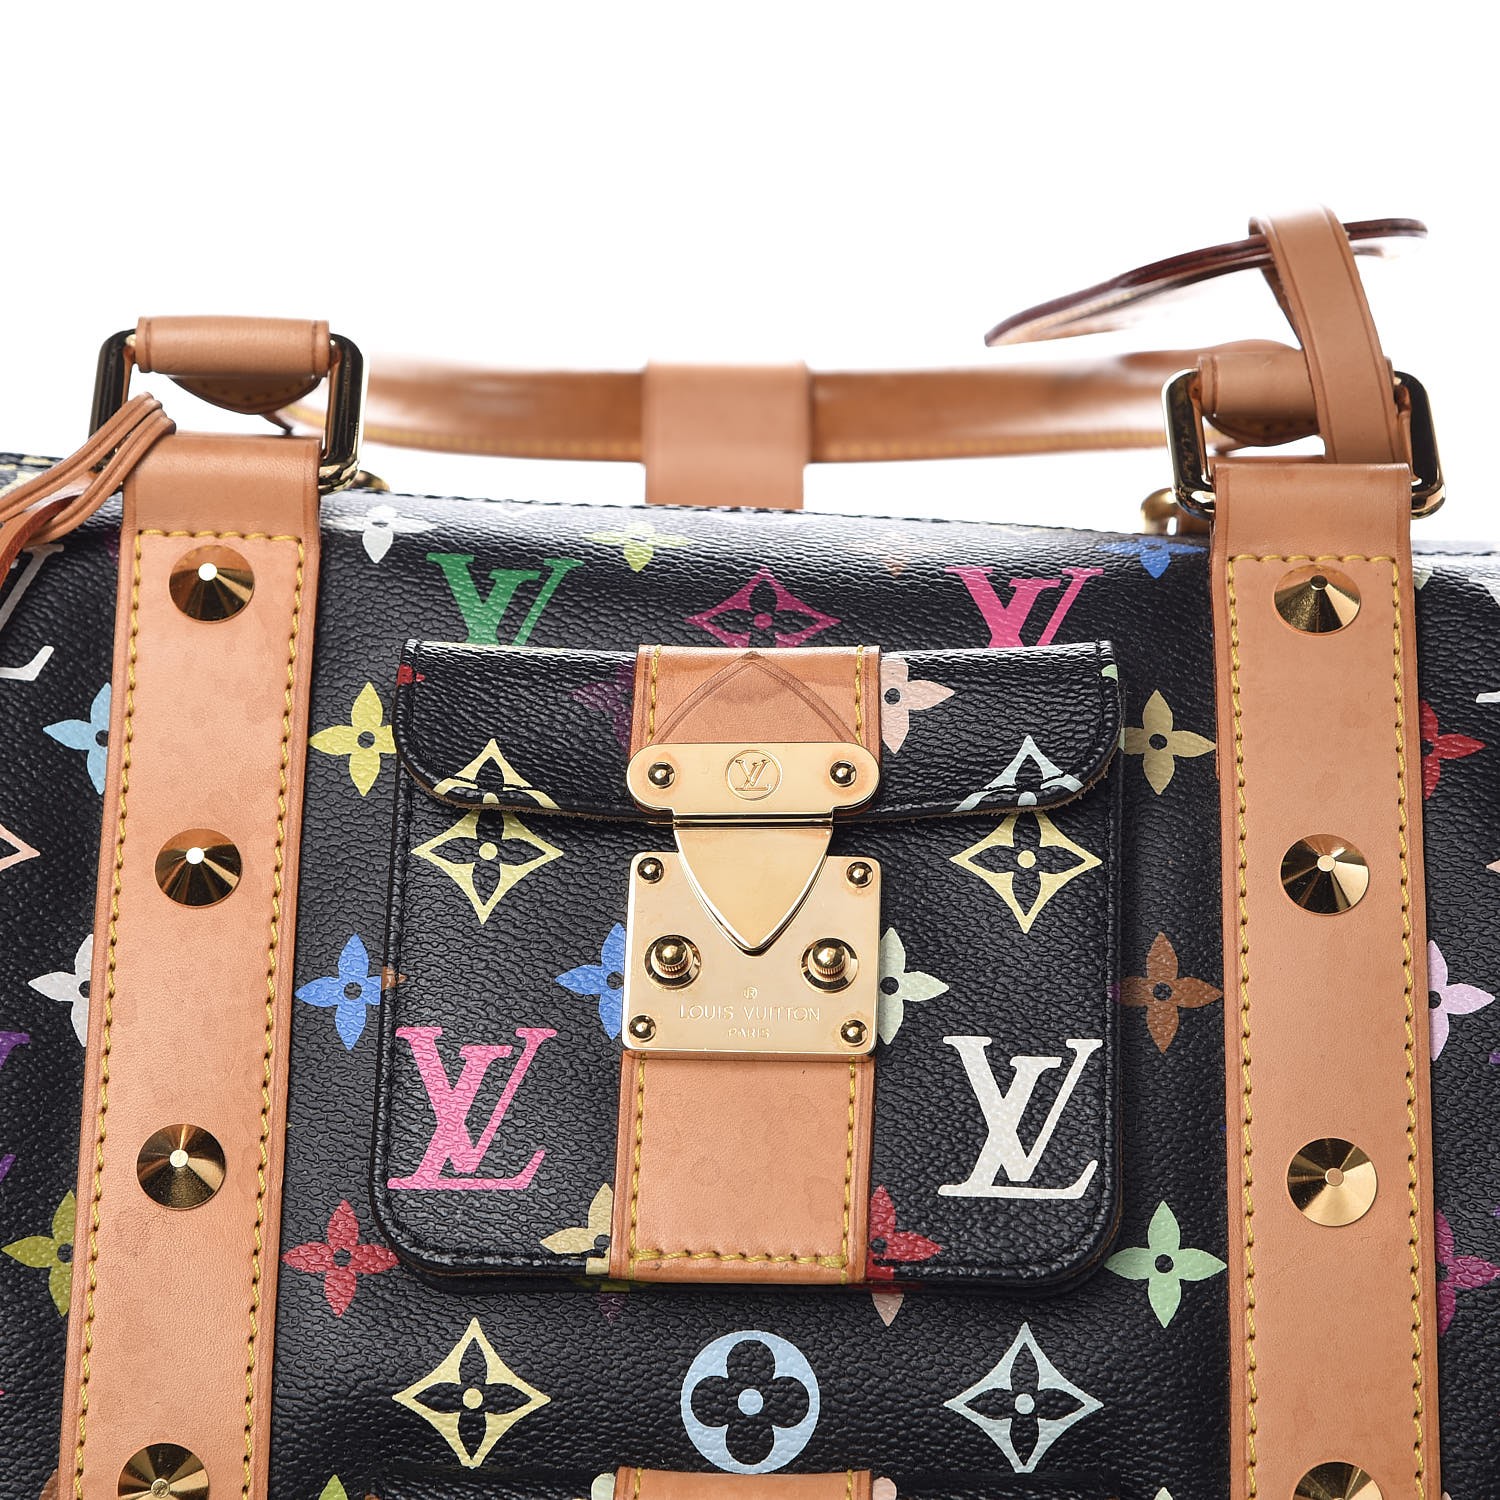 Louis Vuitton Monogram Multicolore Keepall 45 - Black Luggage and